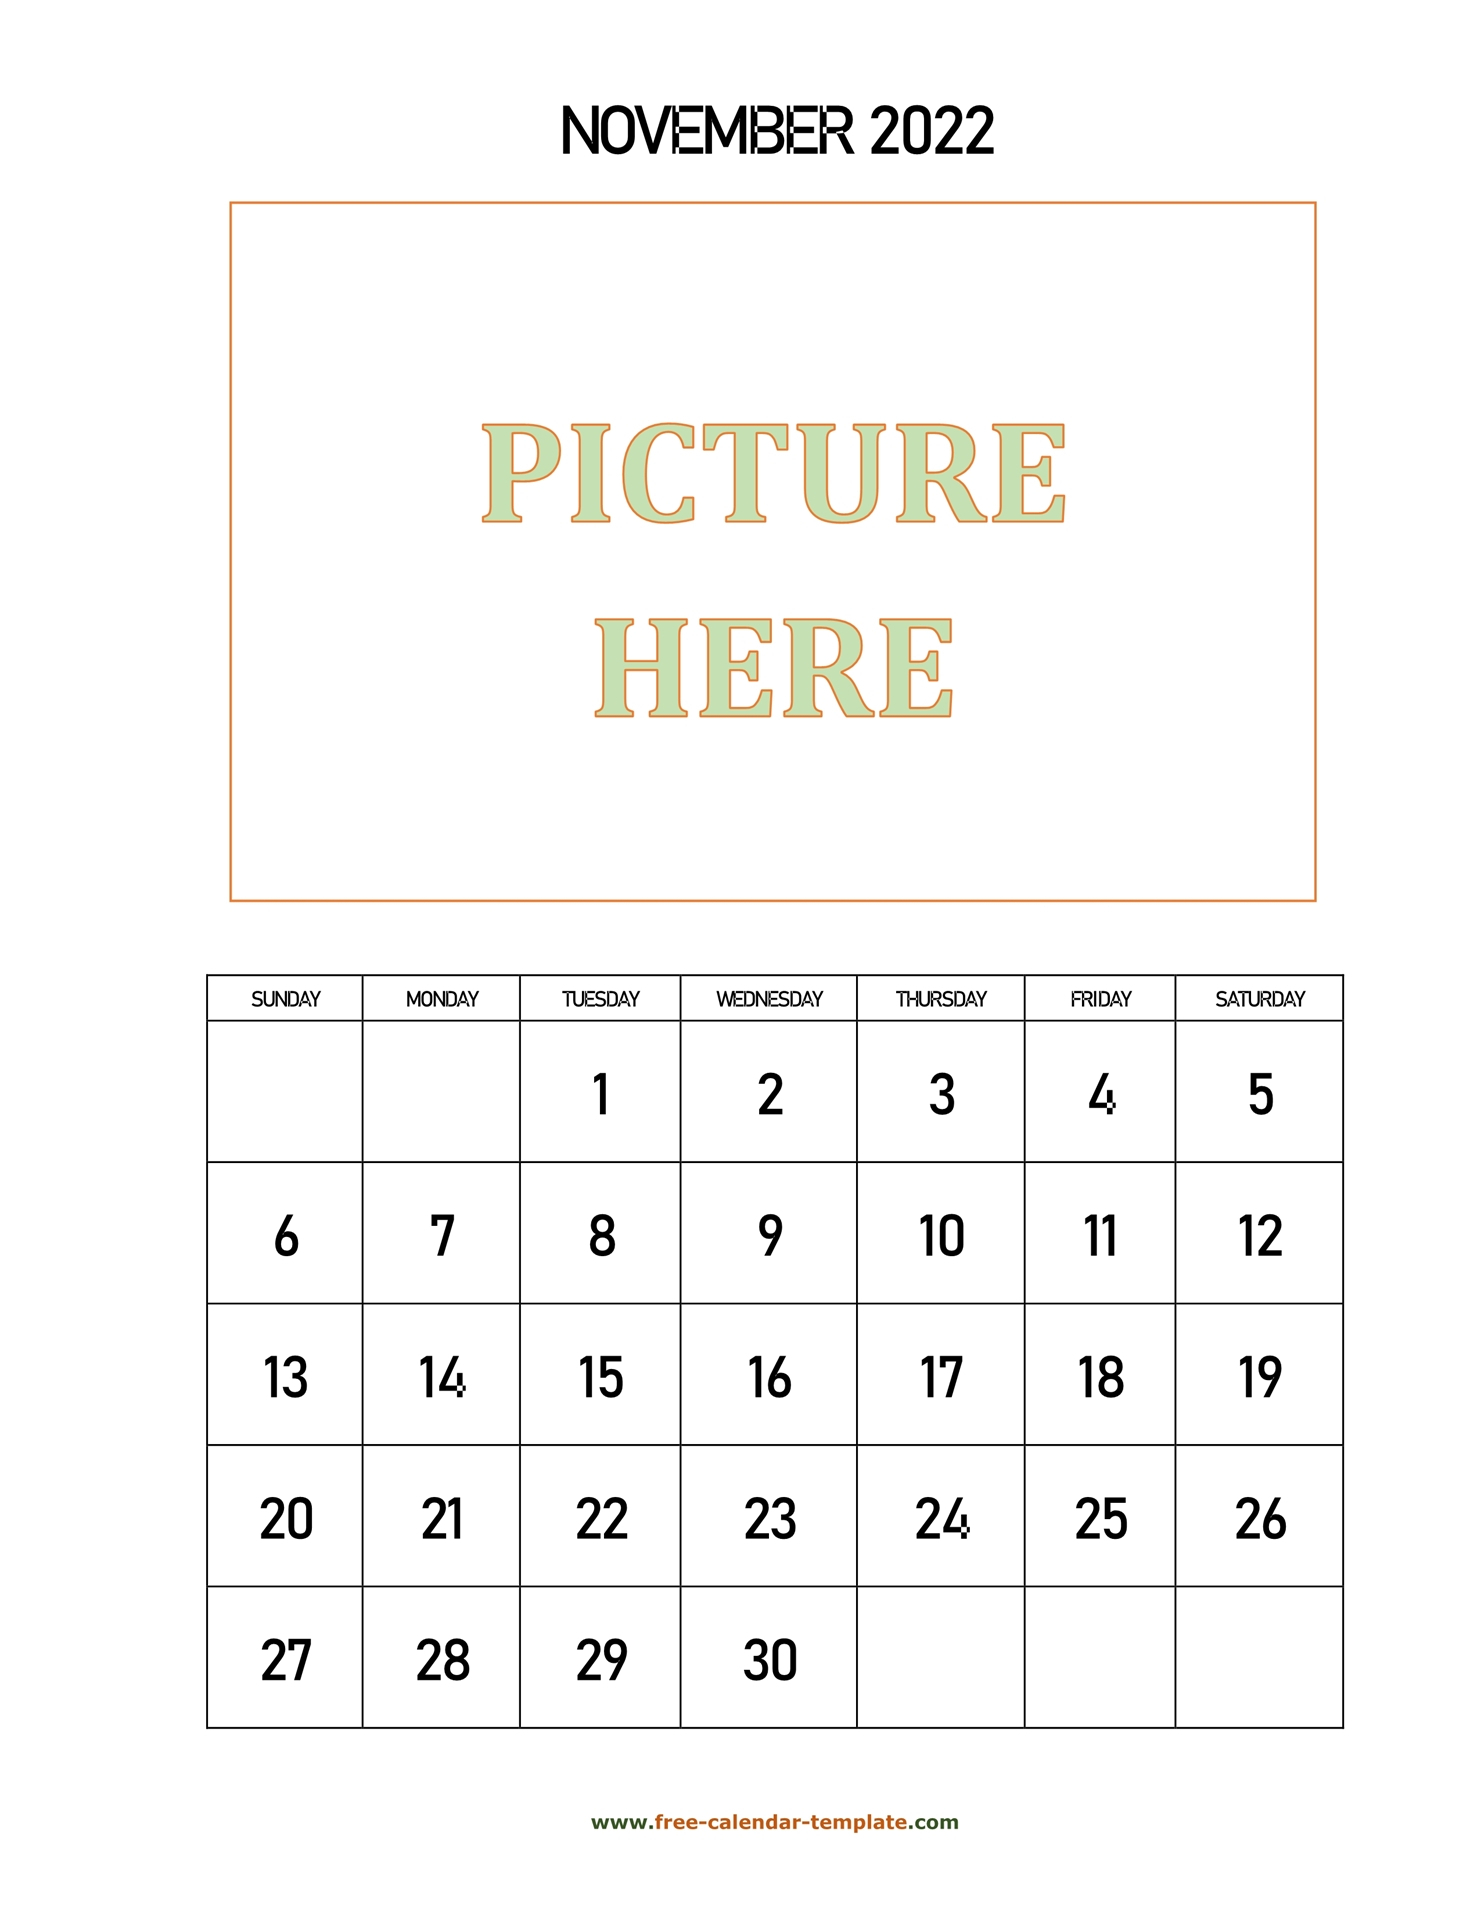 November Printable 2022 Calendar, Space For Add Picture